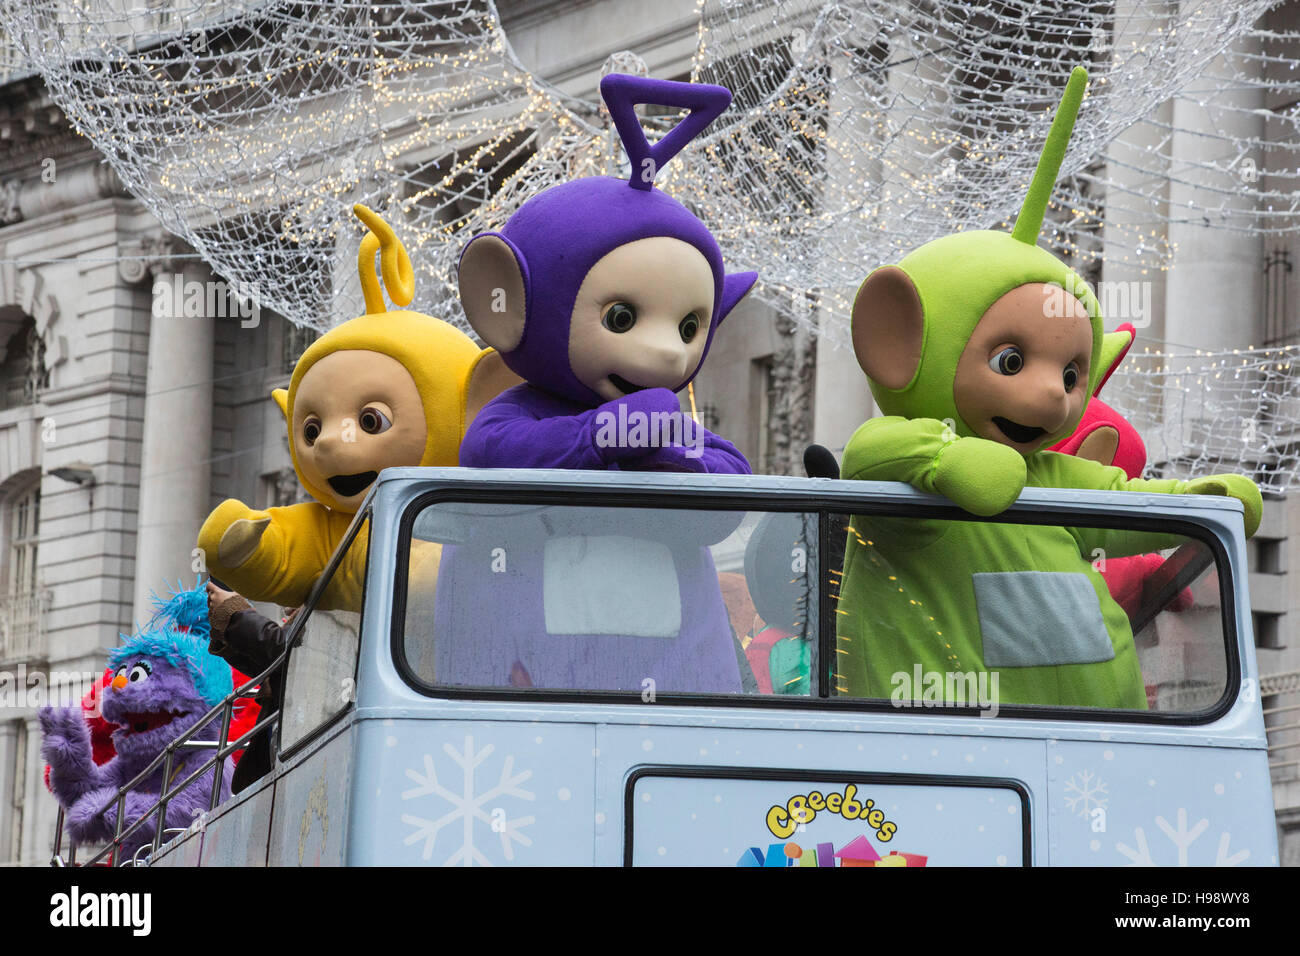 London, UK. 20 November 2016. Teletubbies. The 2016 Hamleys Christmas Toy Parade takes place along Regent Street, which went traffic-free for the day. The parade organised by the world-famous toy store Hamleys featured over many of the nation's favourite children's characters along with entertainers, a marching band and giant balloons. The parade is modelled on Macy's annual Thanksgiving Parade in New York. Credit:  Bettina Strenske/Alamy Live News Stock Photo